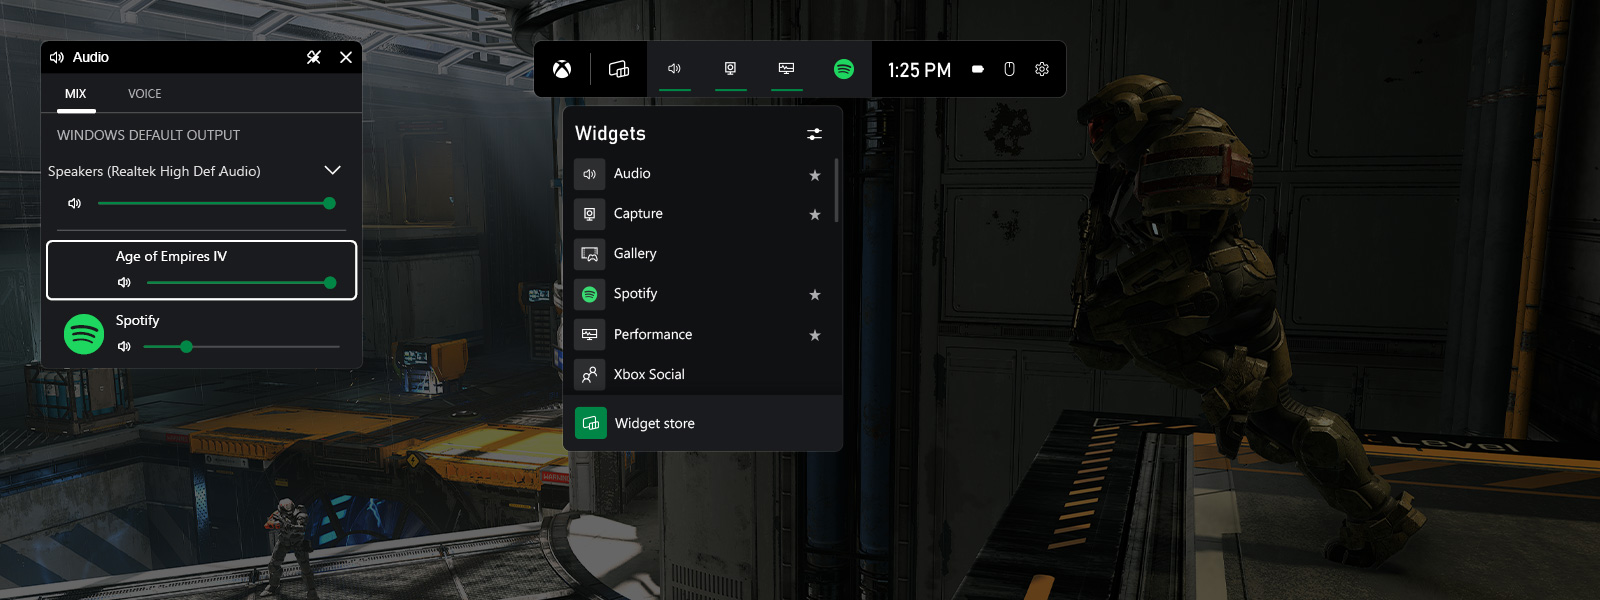 screenshot of the xbox dash showing default widgets and audio settings